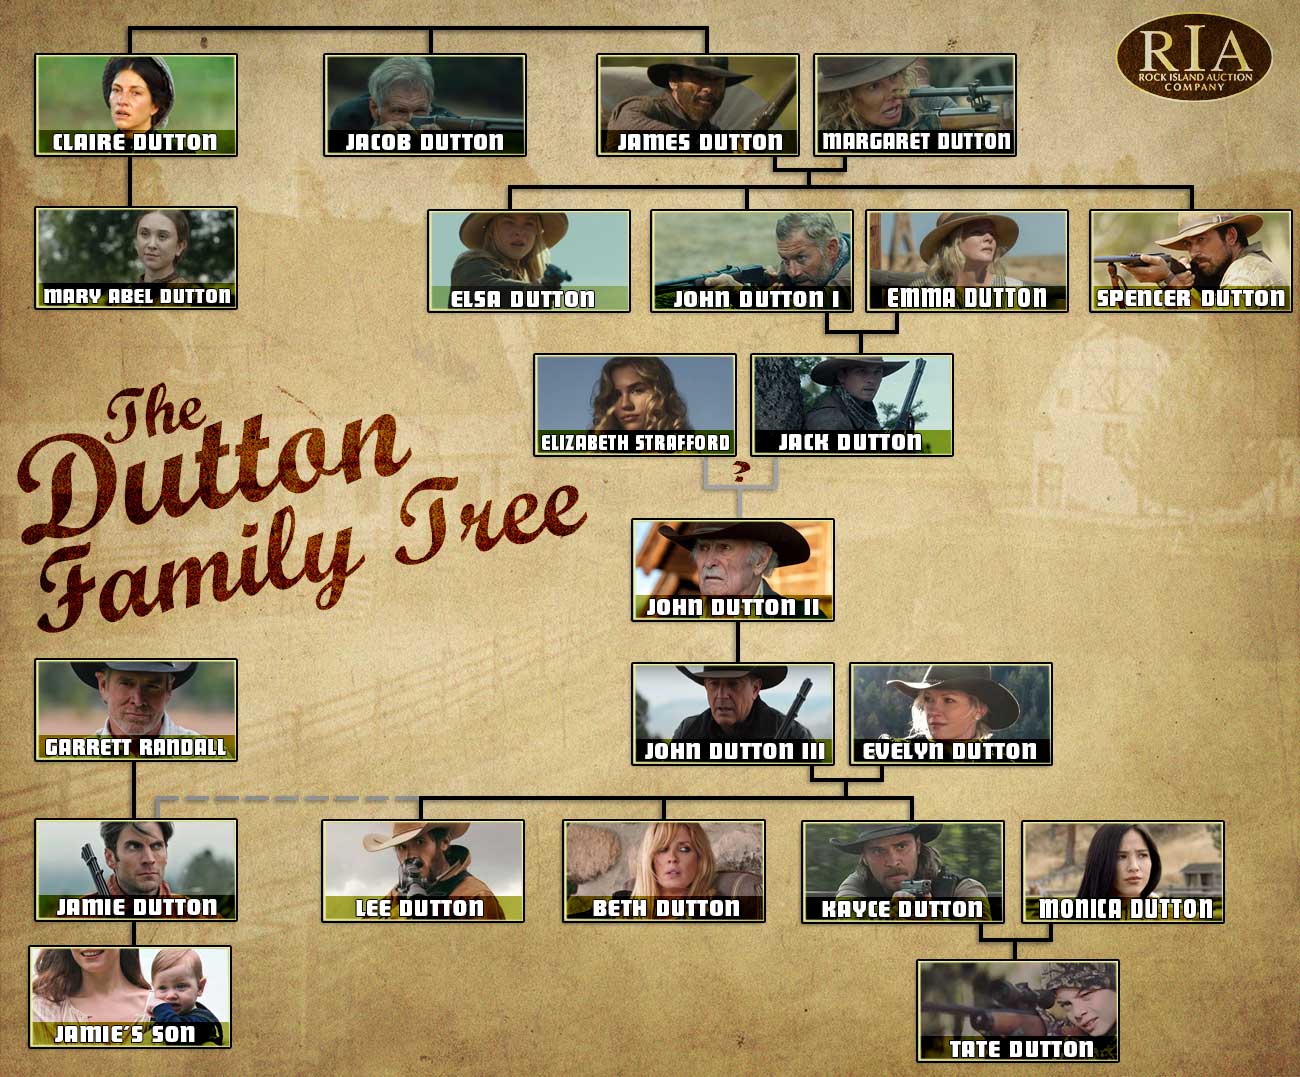 The-Dutton-Family-Tree-1883-through-2023-Rock-Island-Auction-Company